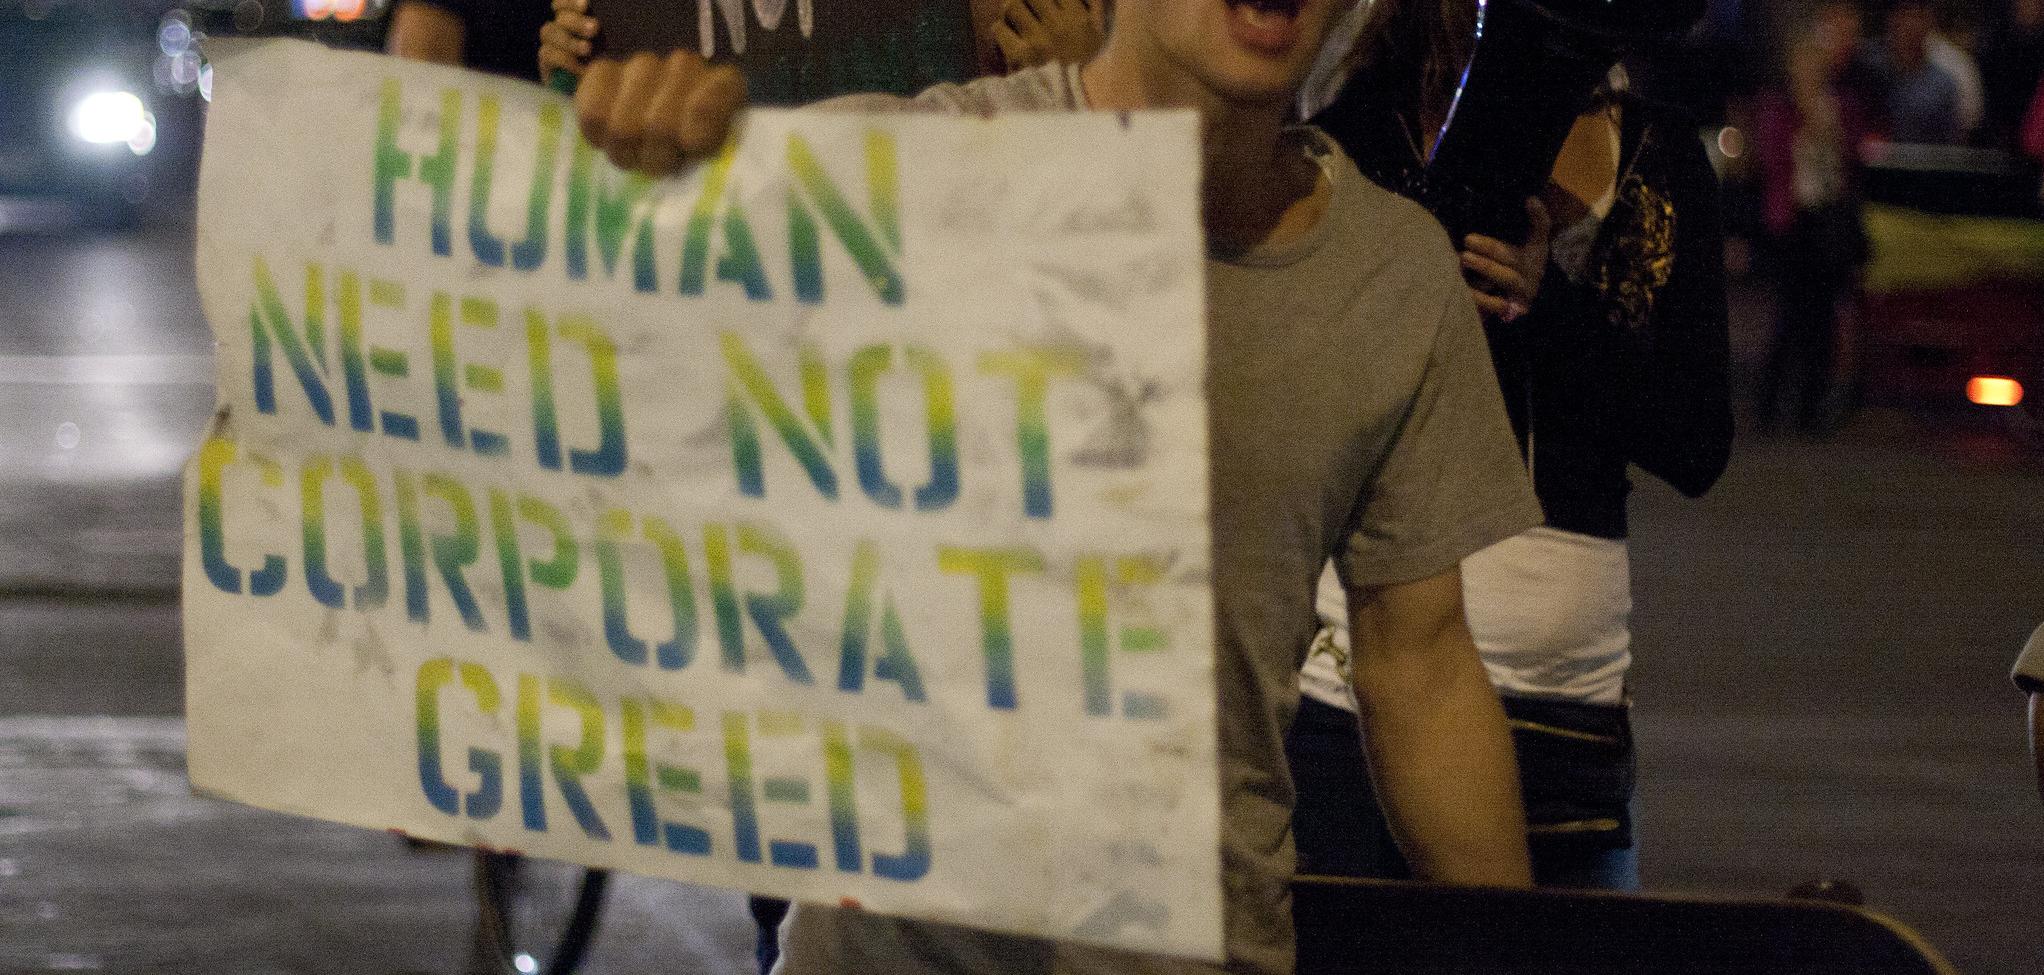 A person carrying a sign that reads "Human need not corporate greed"